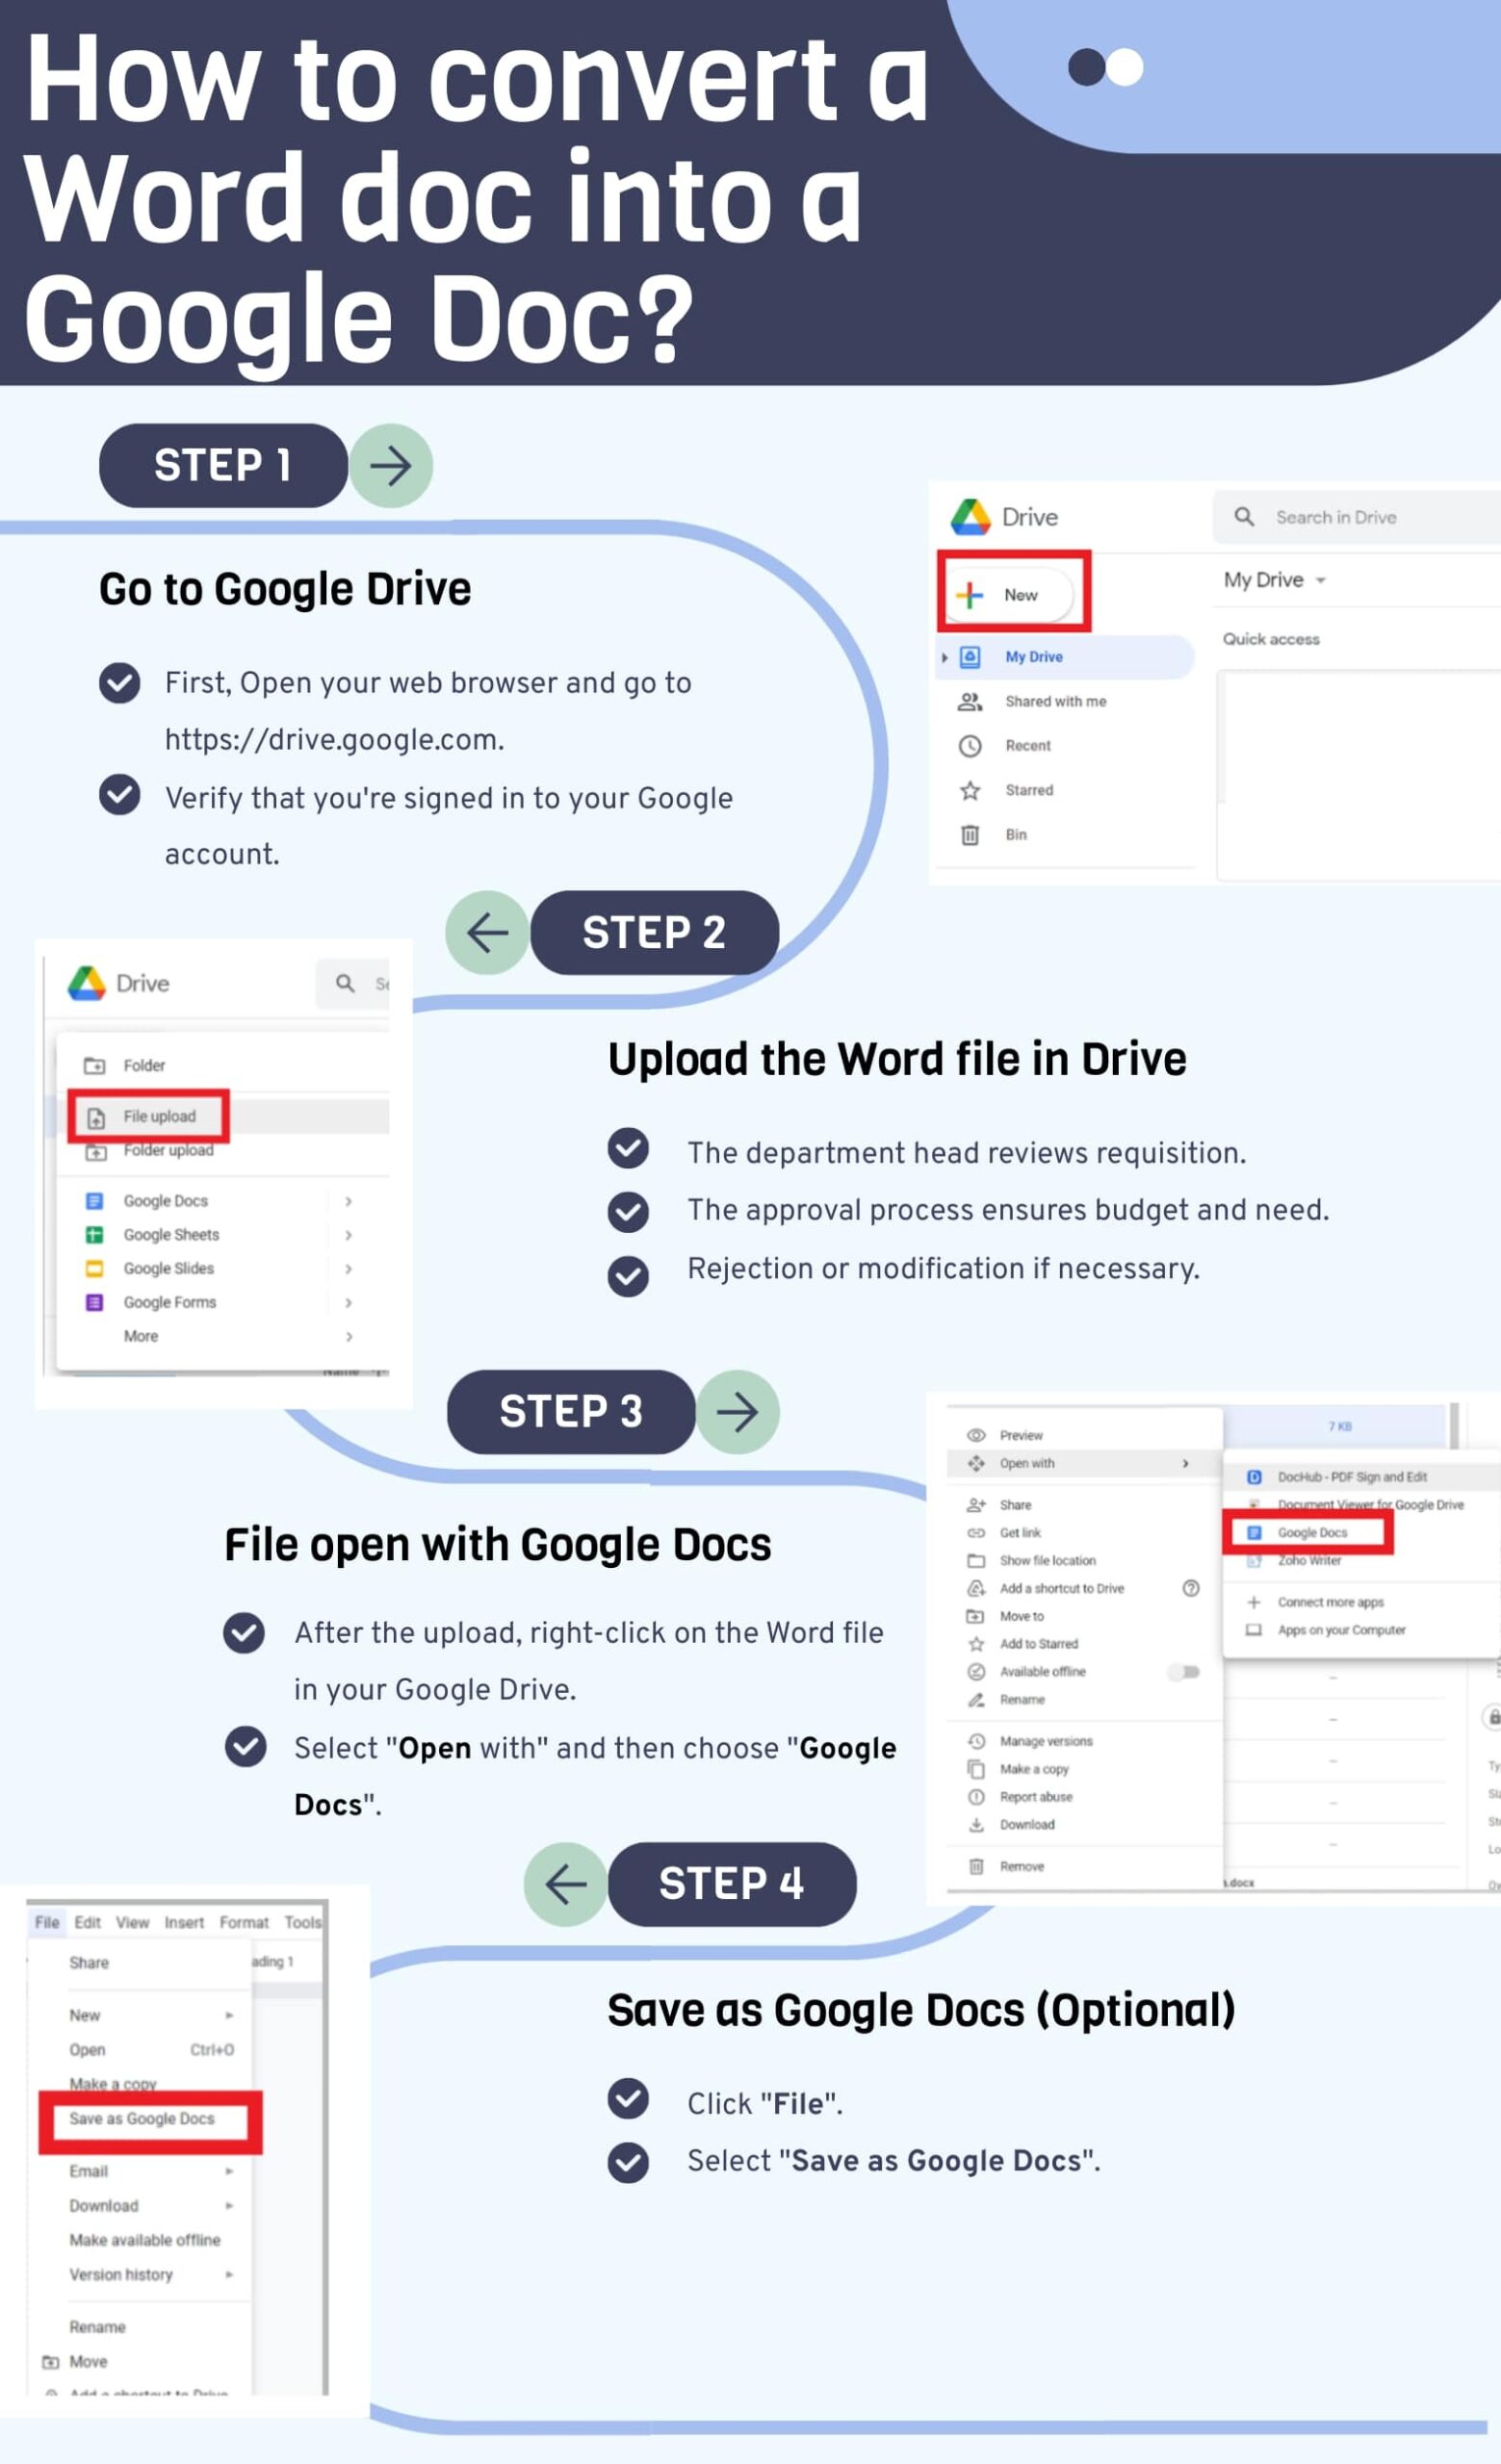 How to convert a Word doc into a Google Doc step by step guide